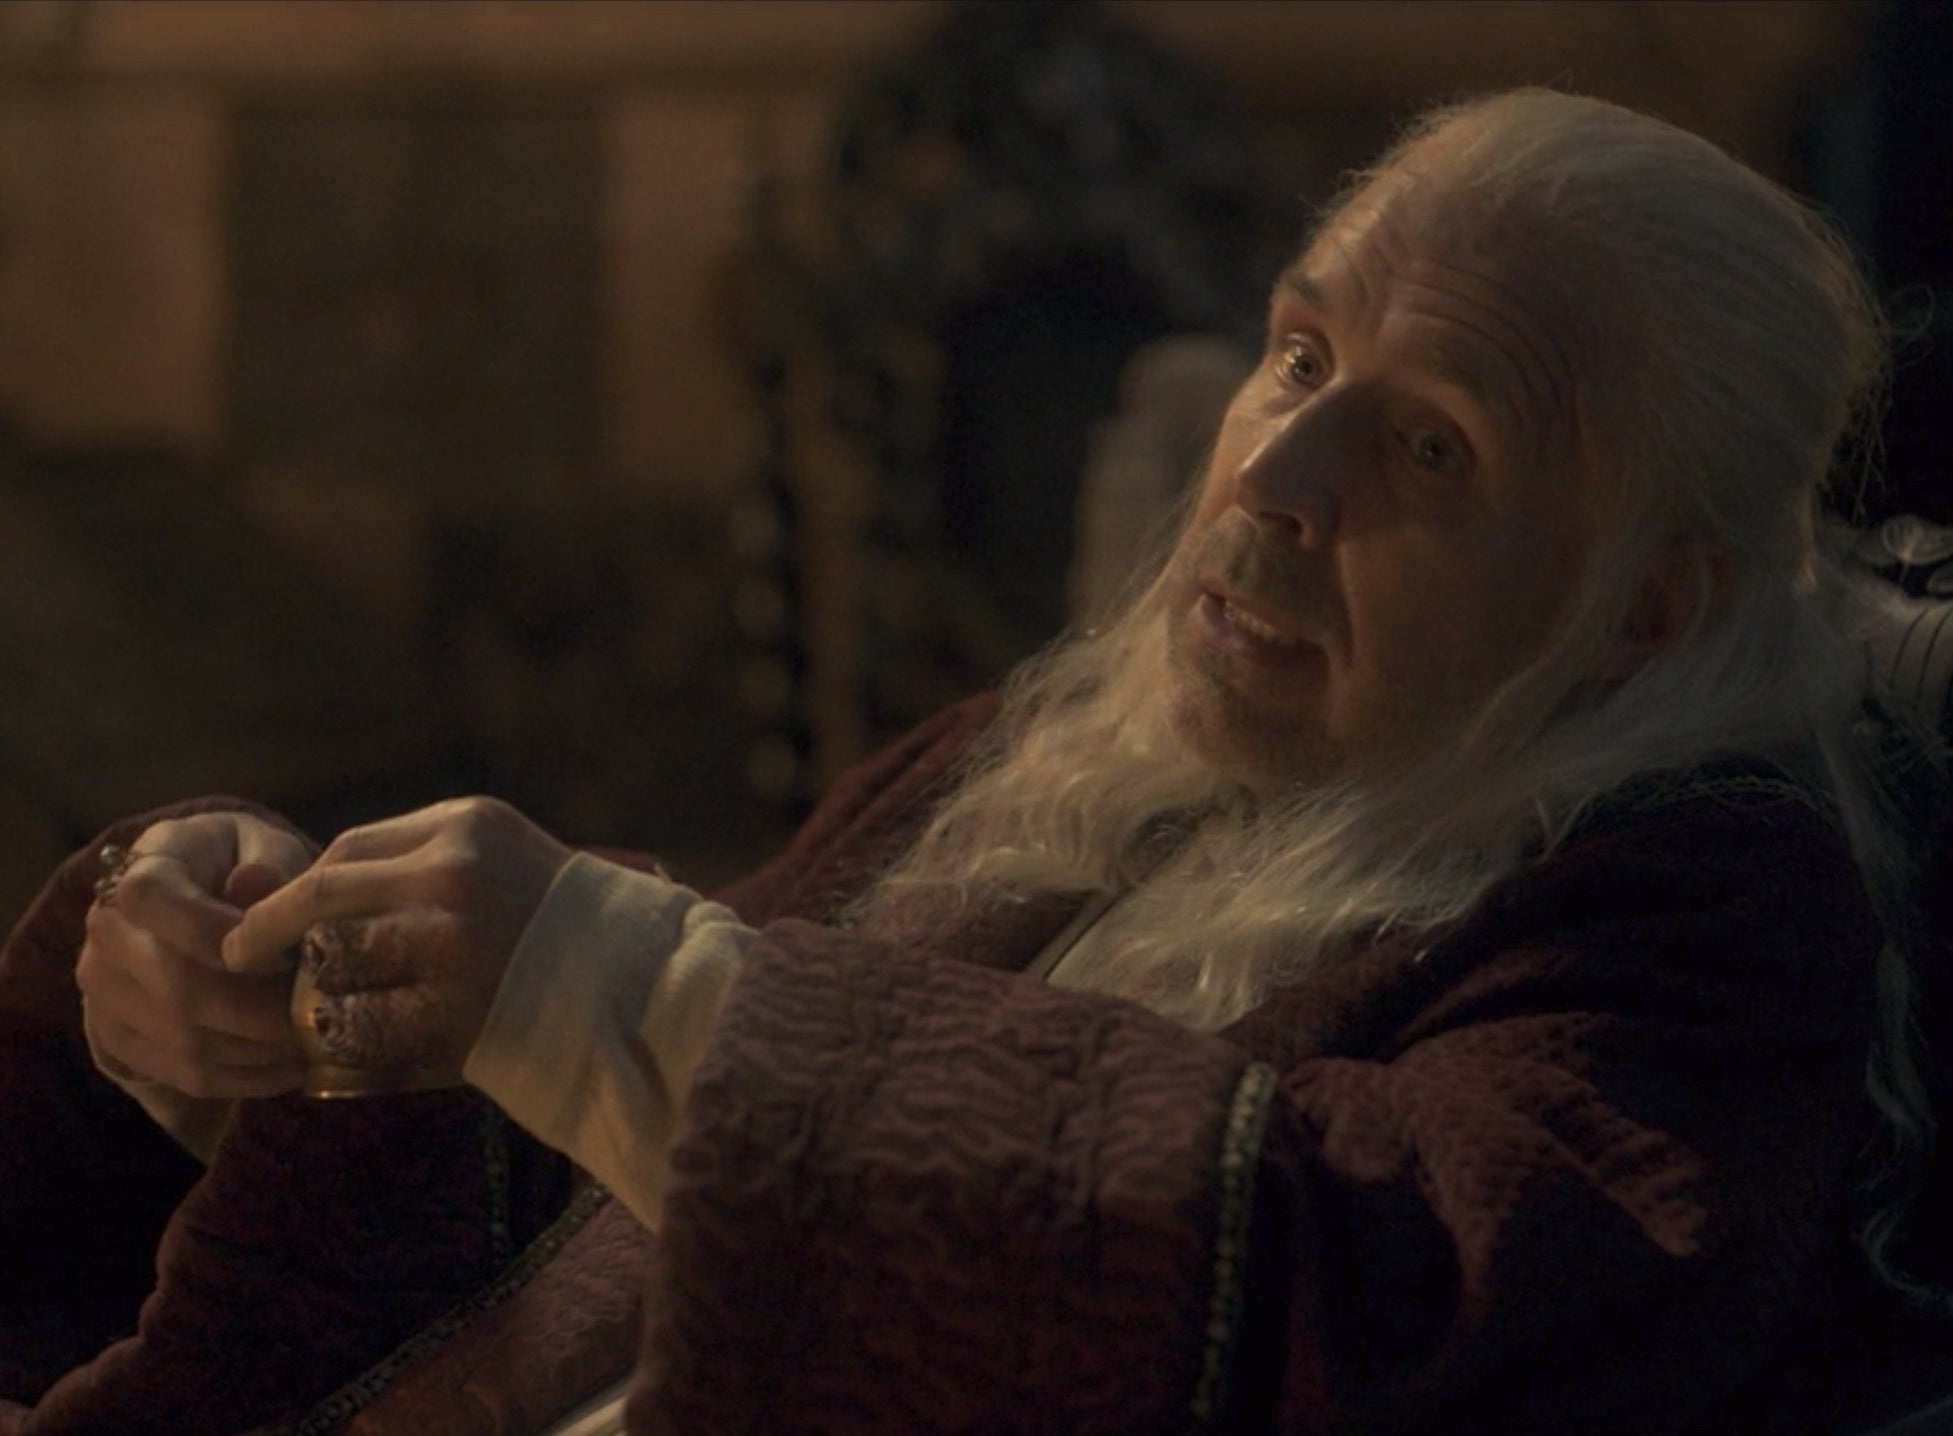 King Viserys holds up his hands and two fingers are missing